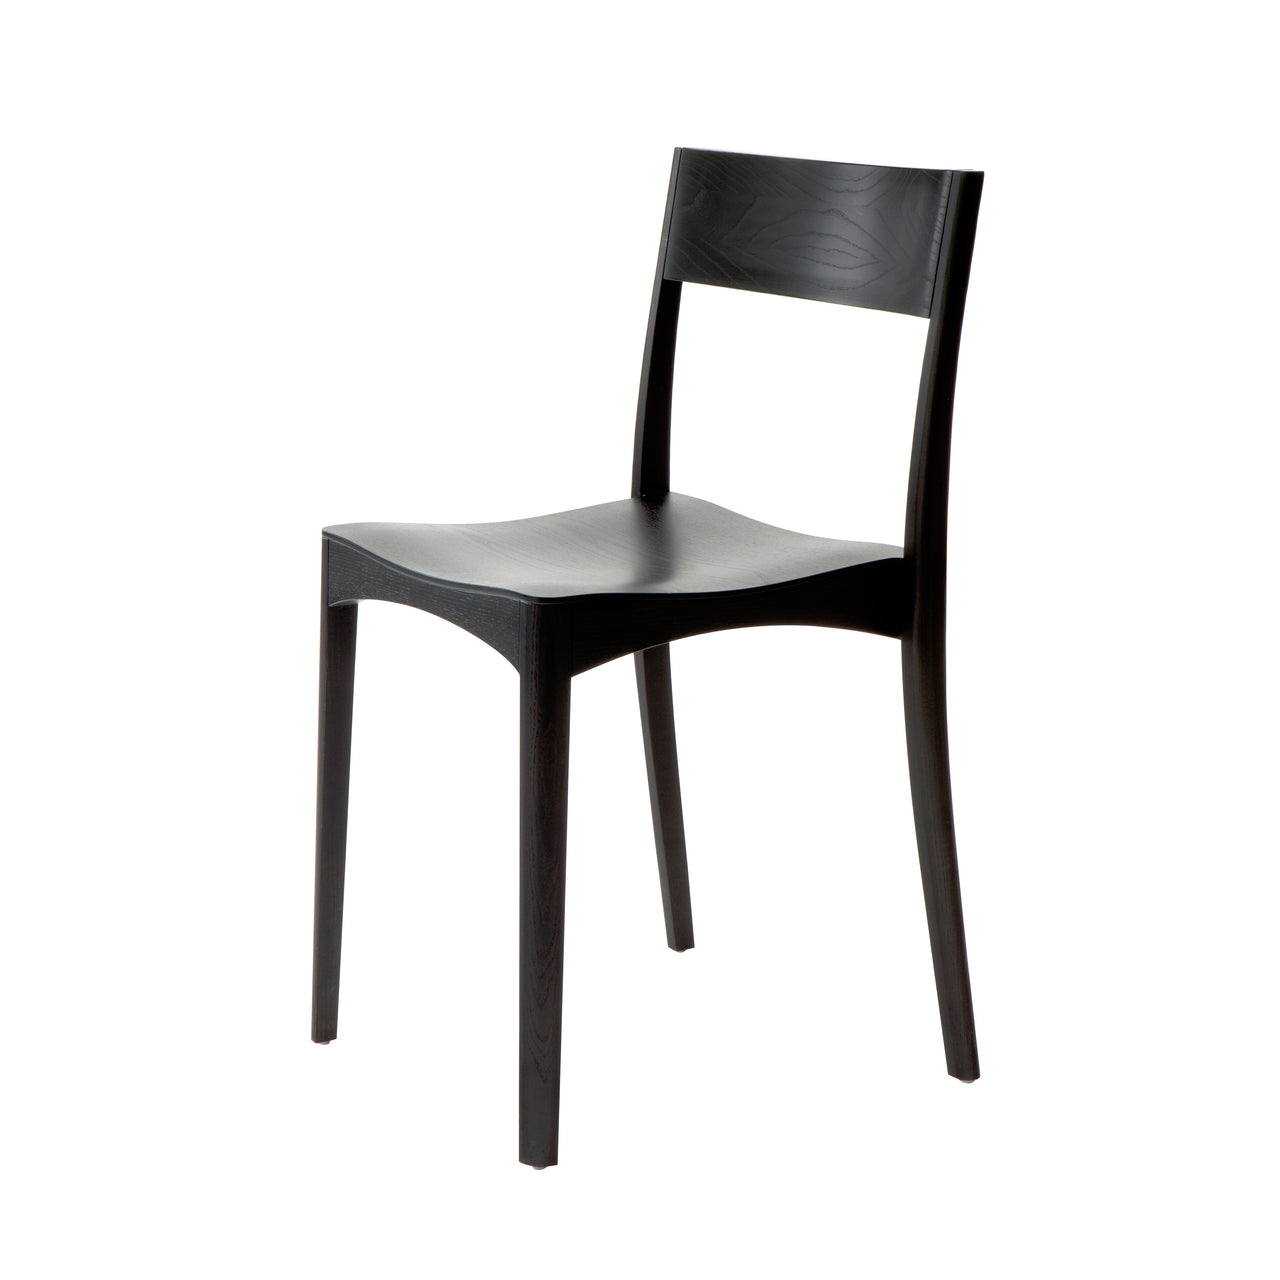 October Light Chair: Black Stained Ash